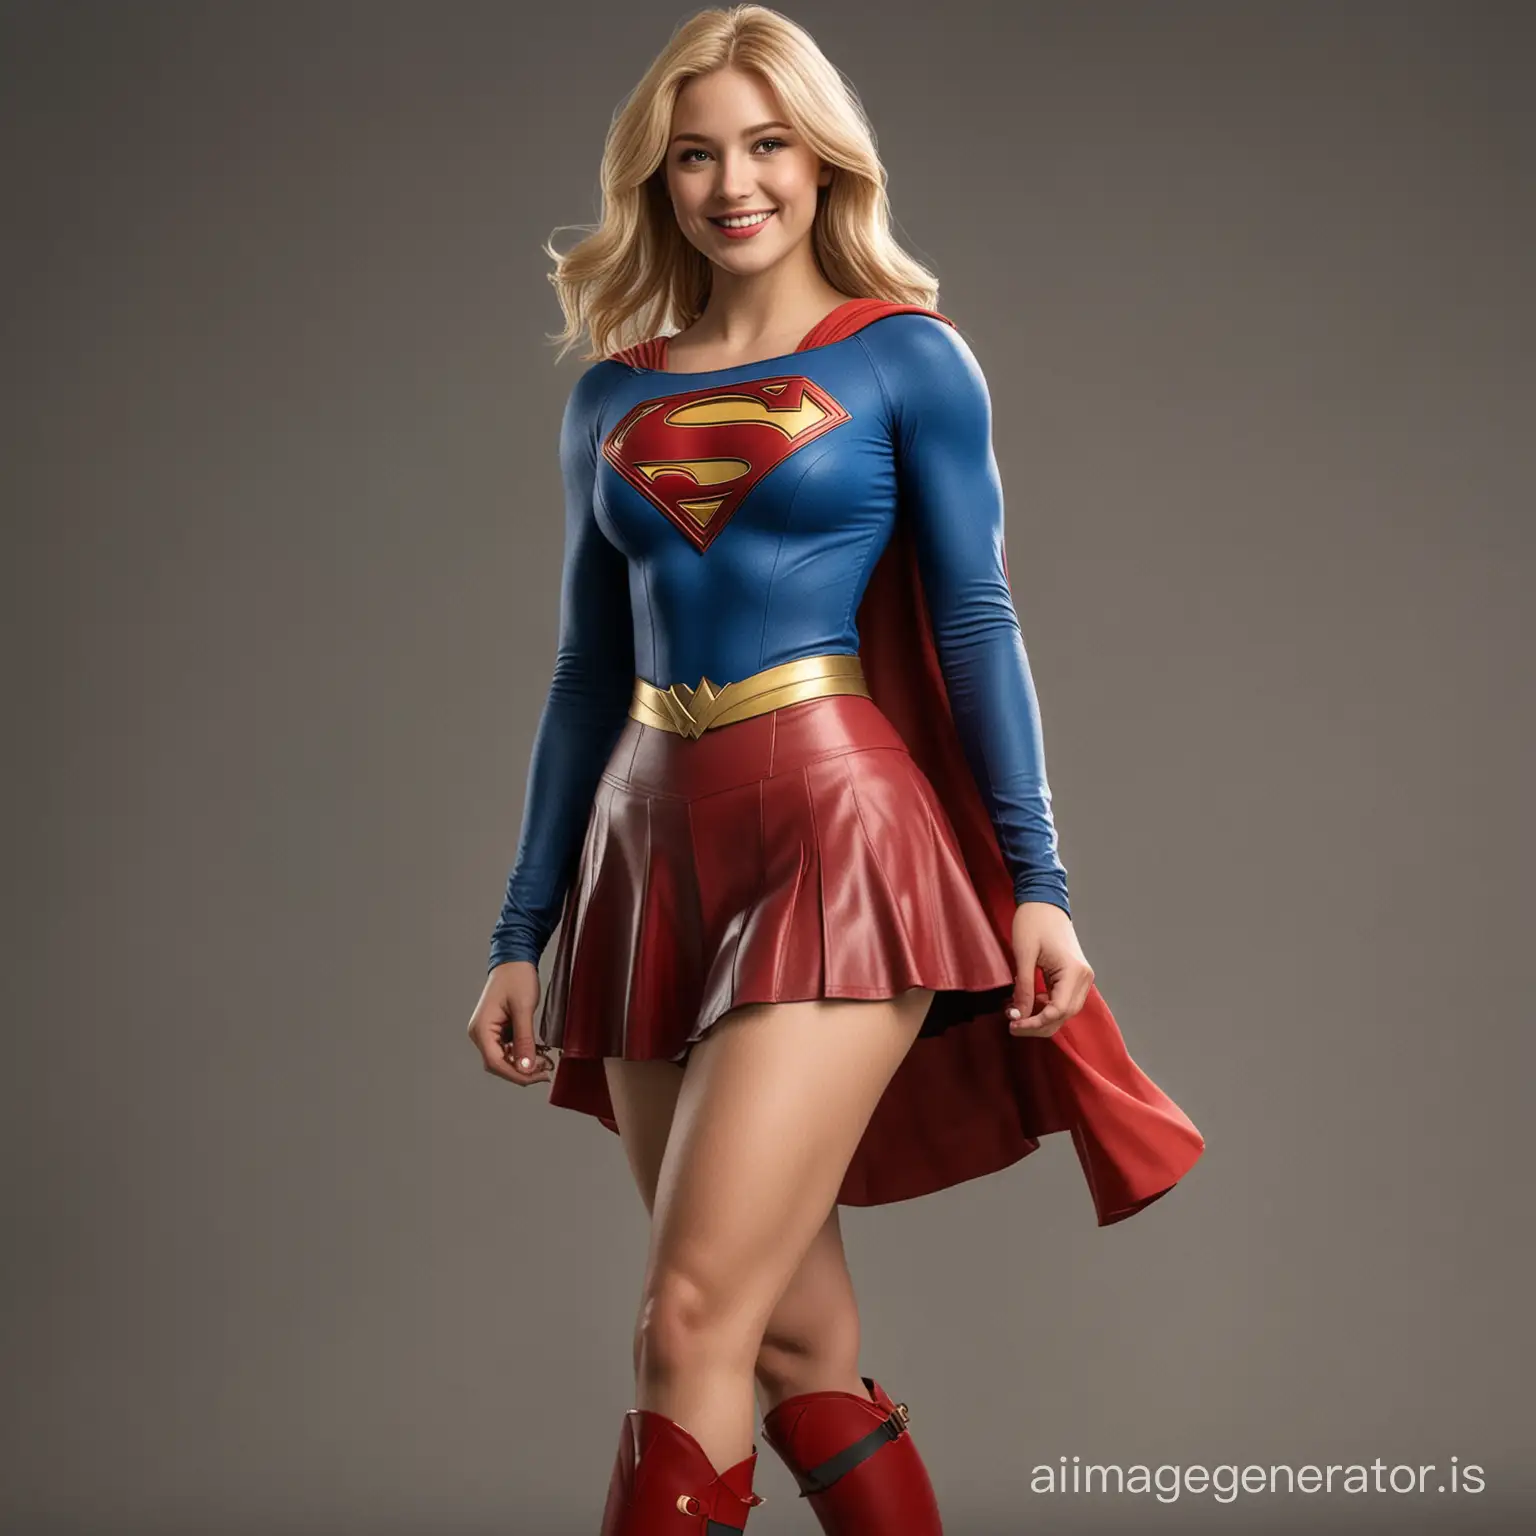 Most happiness-inducing image that includes Supergirl. Her perfect smile is conveying joy, eternal love and acceptance for the viewer. She has voluminous bossom, wide hips, slim waist, red boots and skirt, perfect blond hair. She is around 27 years old. The image is in the style of modern realistic DC comics.